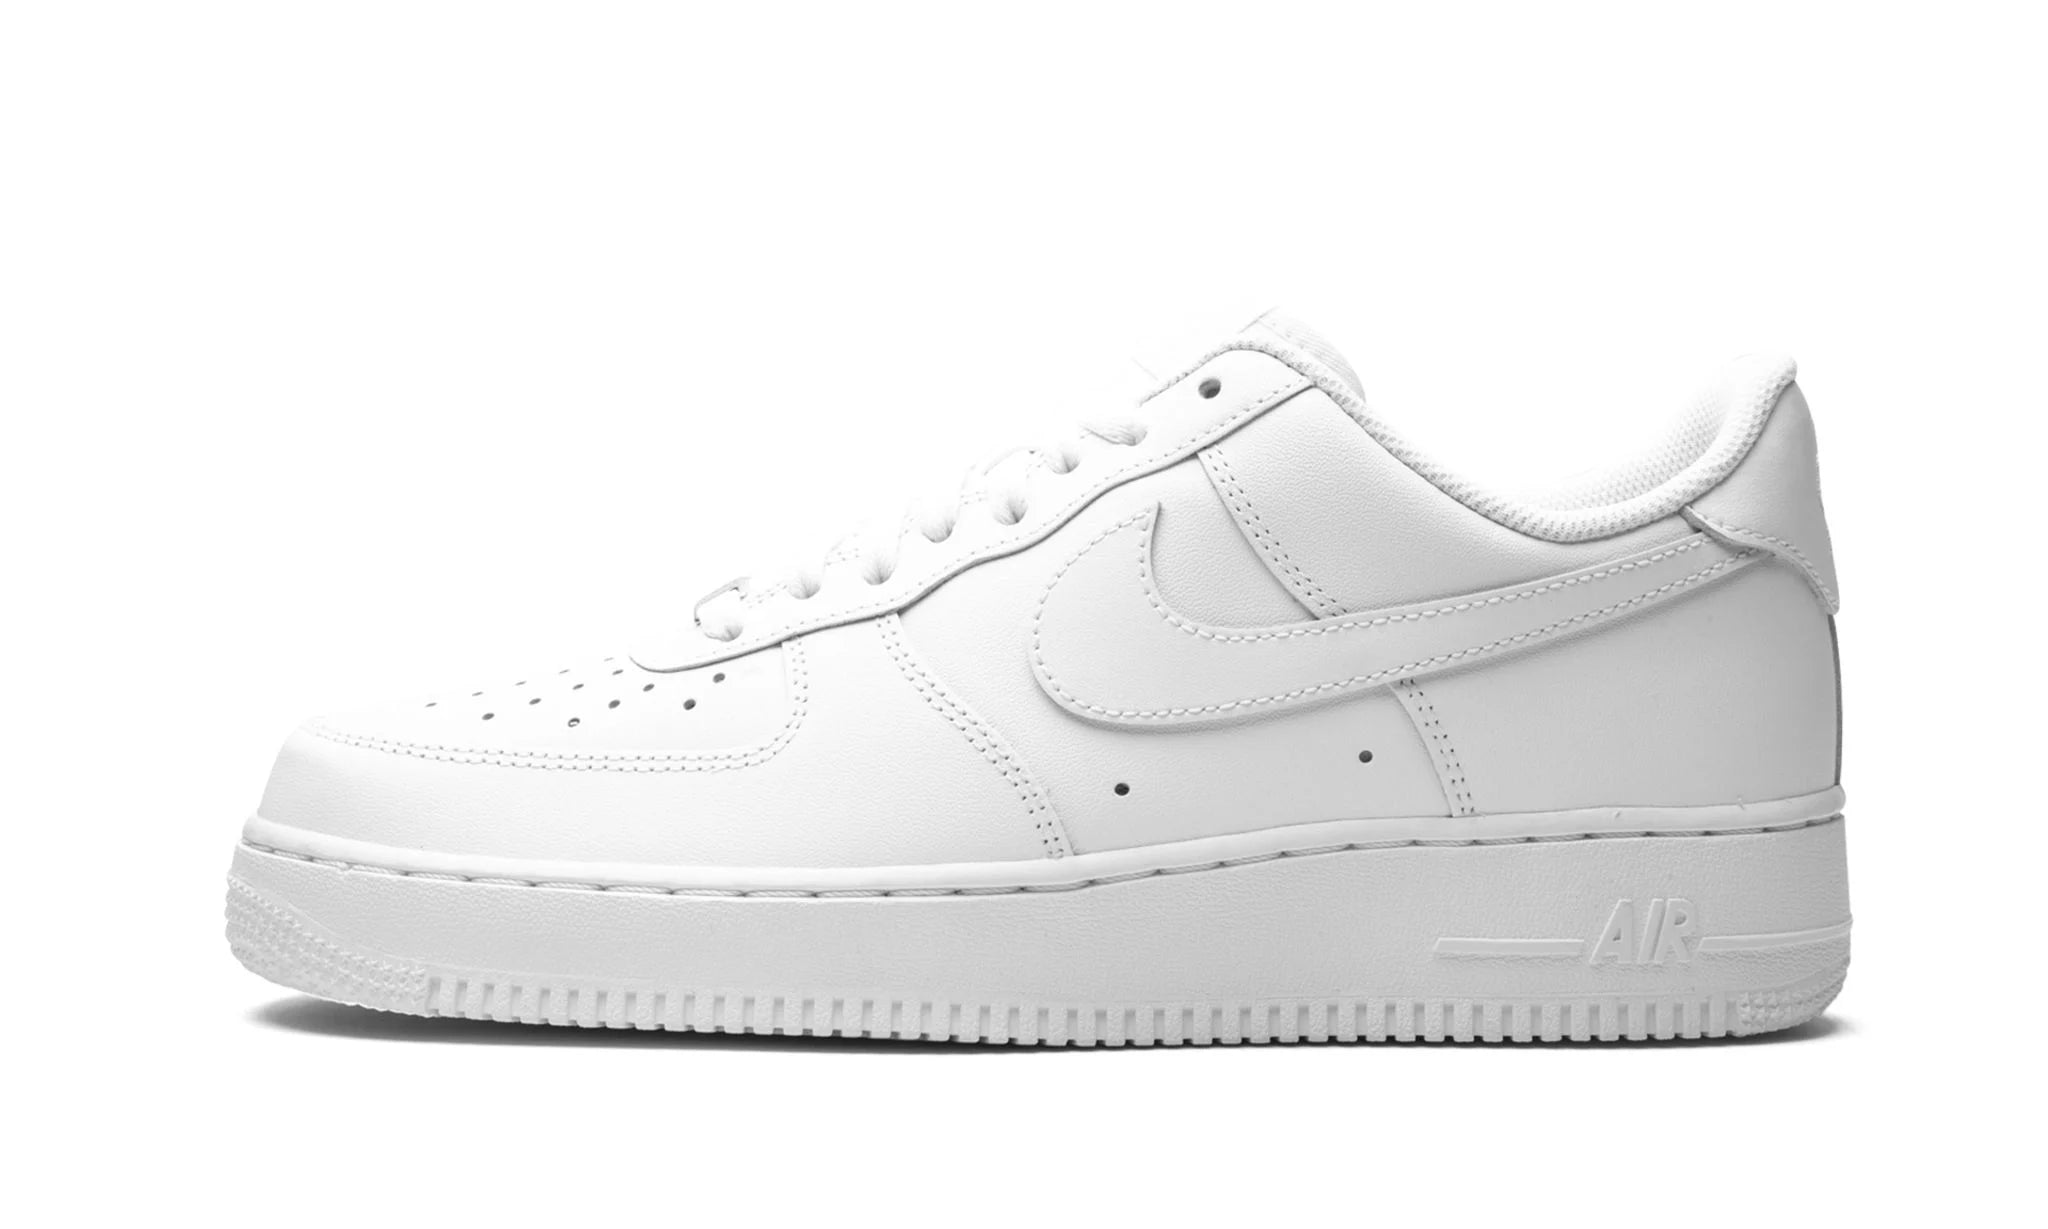 AIR FORCE 1 LOW '07 "White on White"